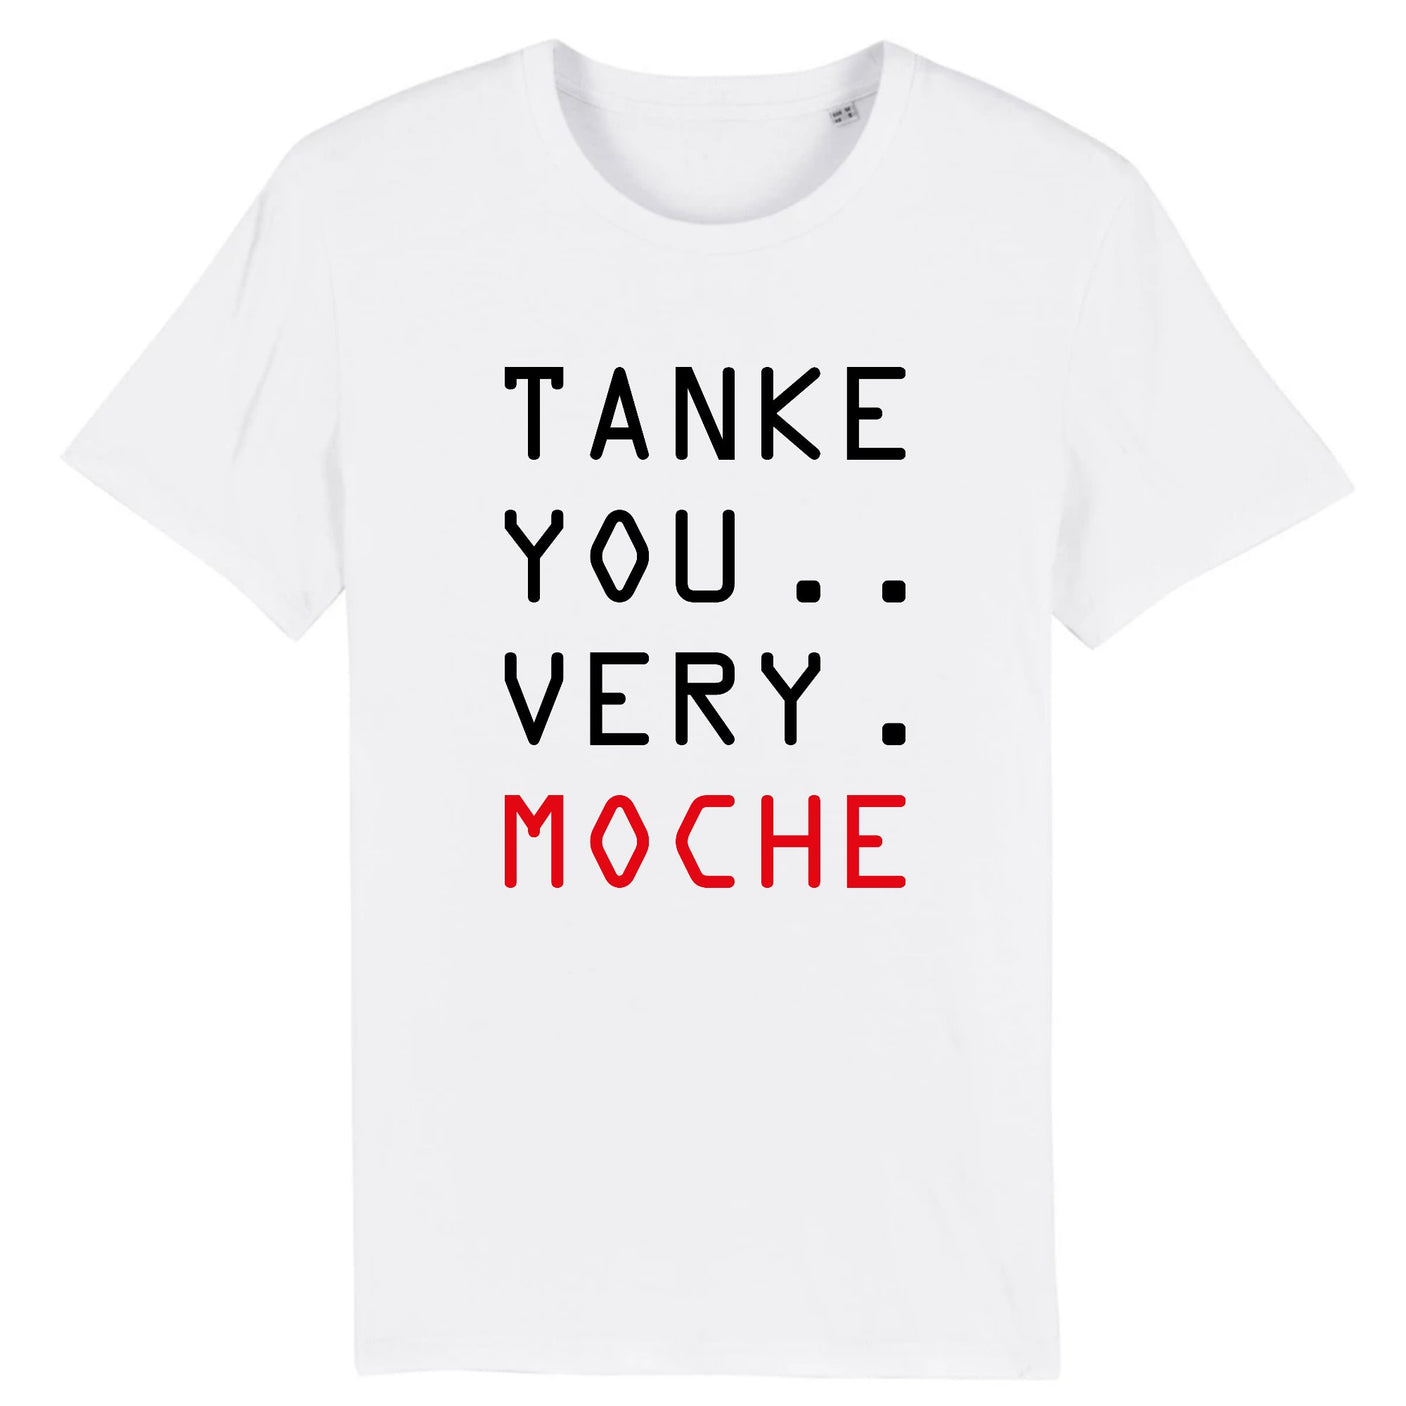 T-Shirt Homme Tanke you very moche 